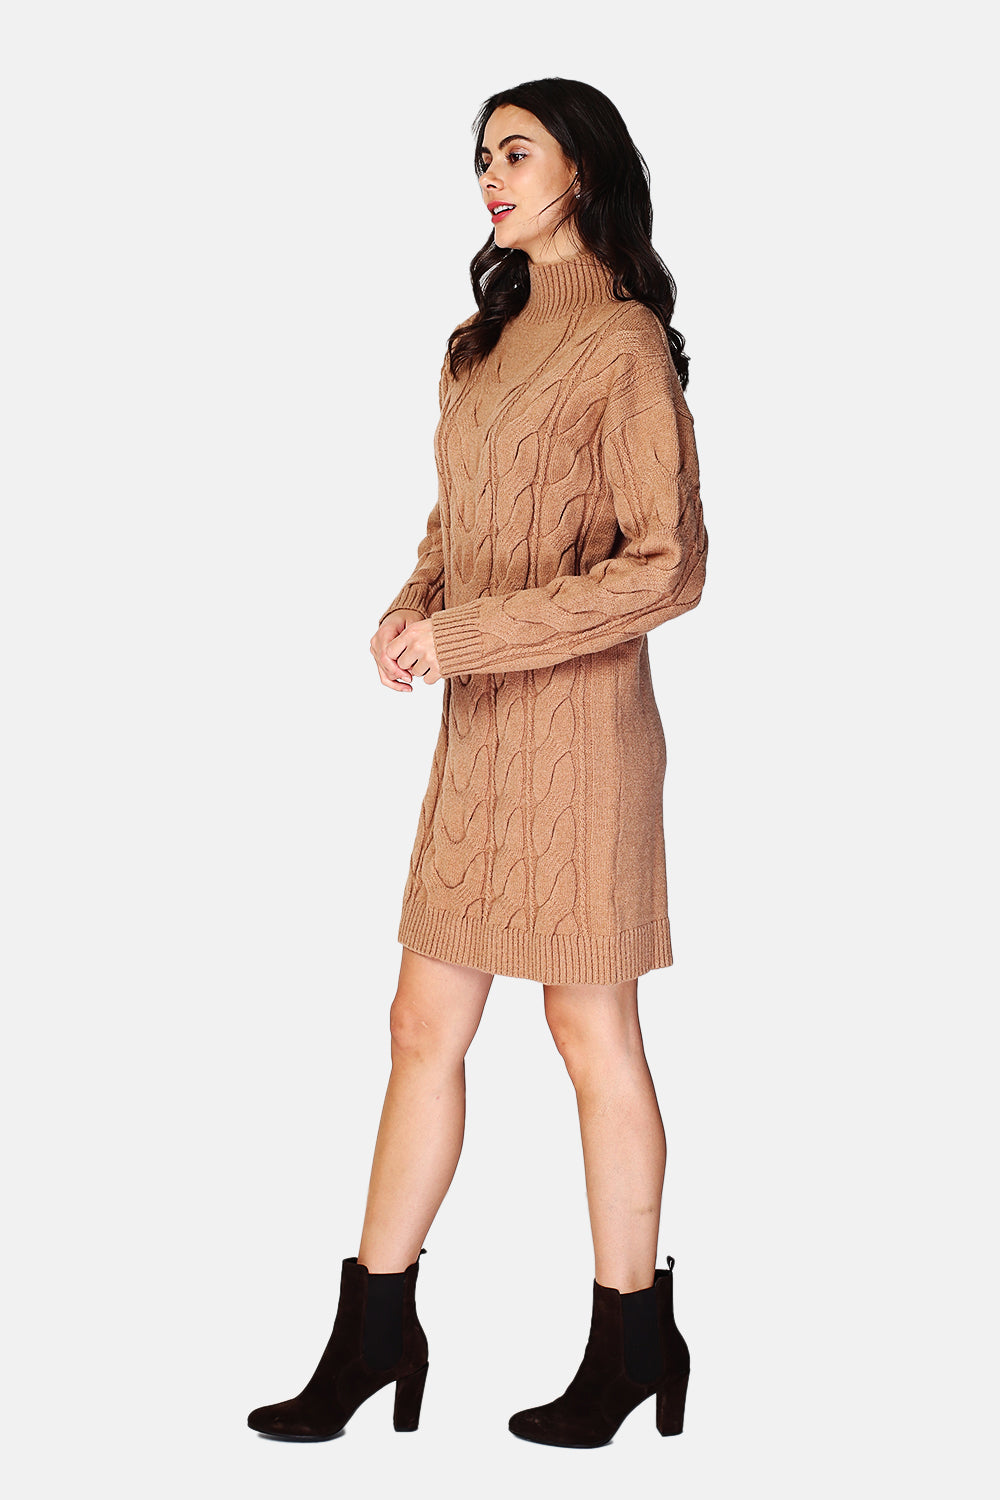 High neck dress, cable knit with long sleeves